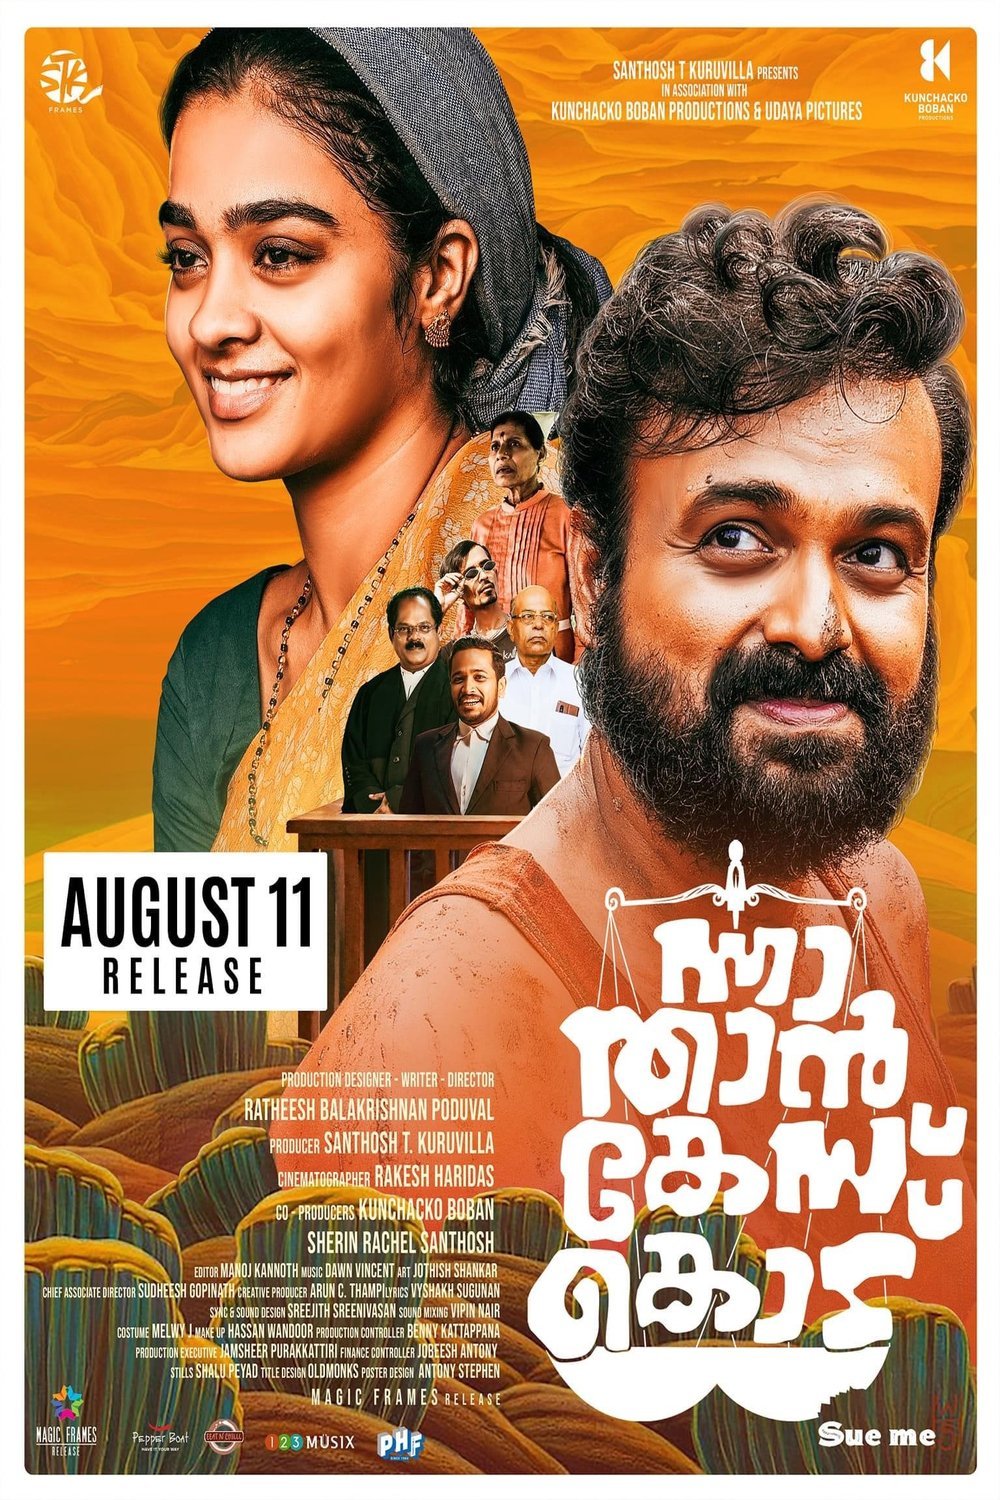 Malayalam poster of the movie Sue Me